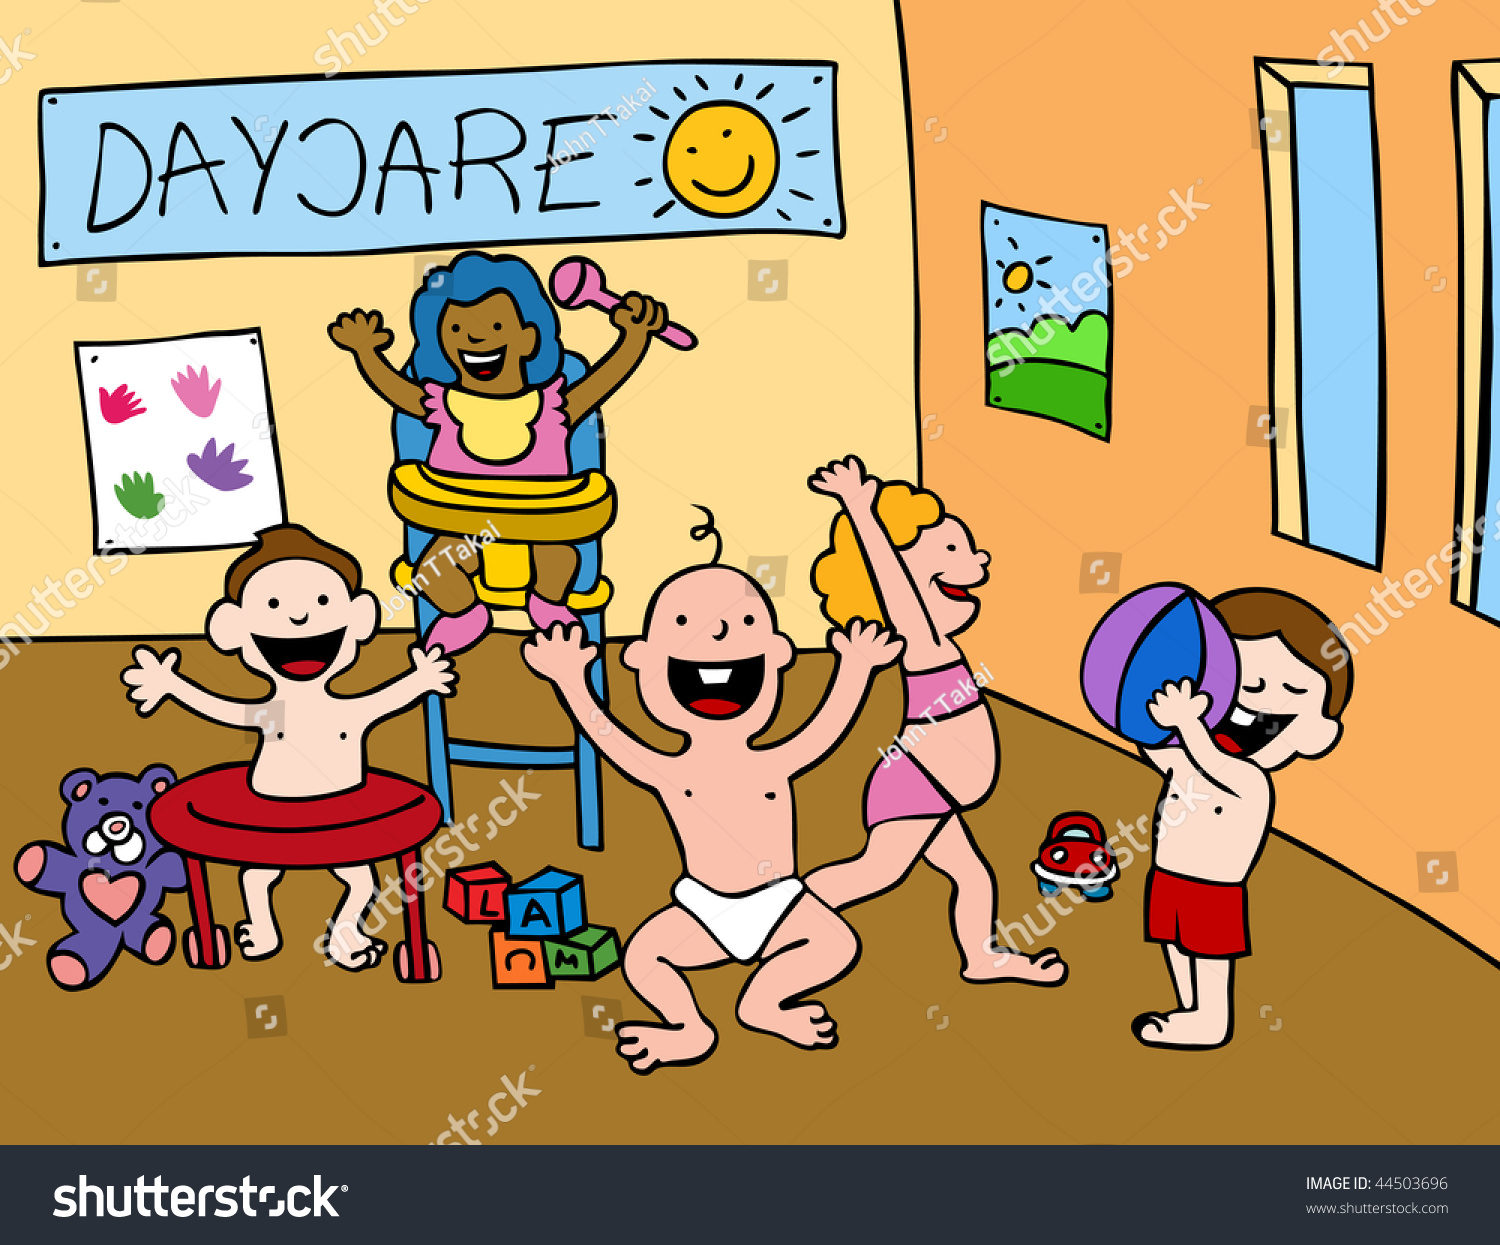 Cartoon Of Babies Playing In A Daycare Center Setting. Stock Photo